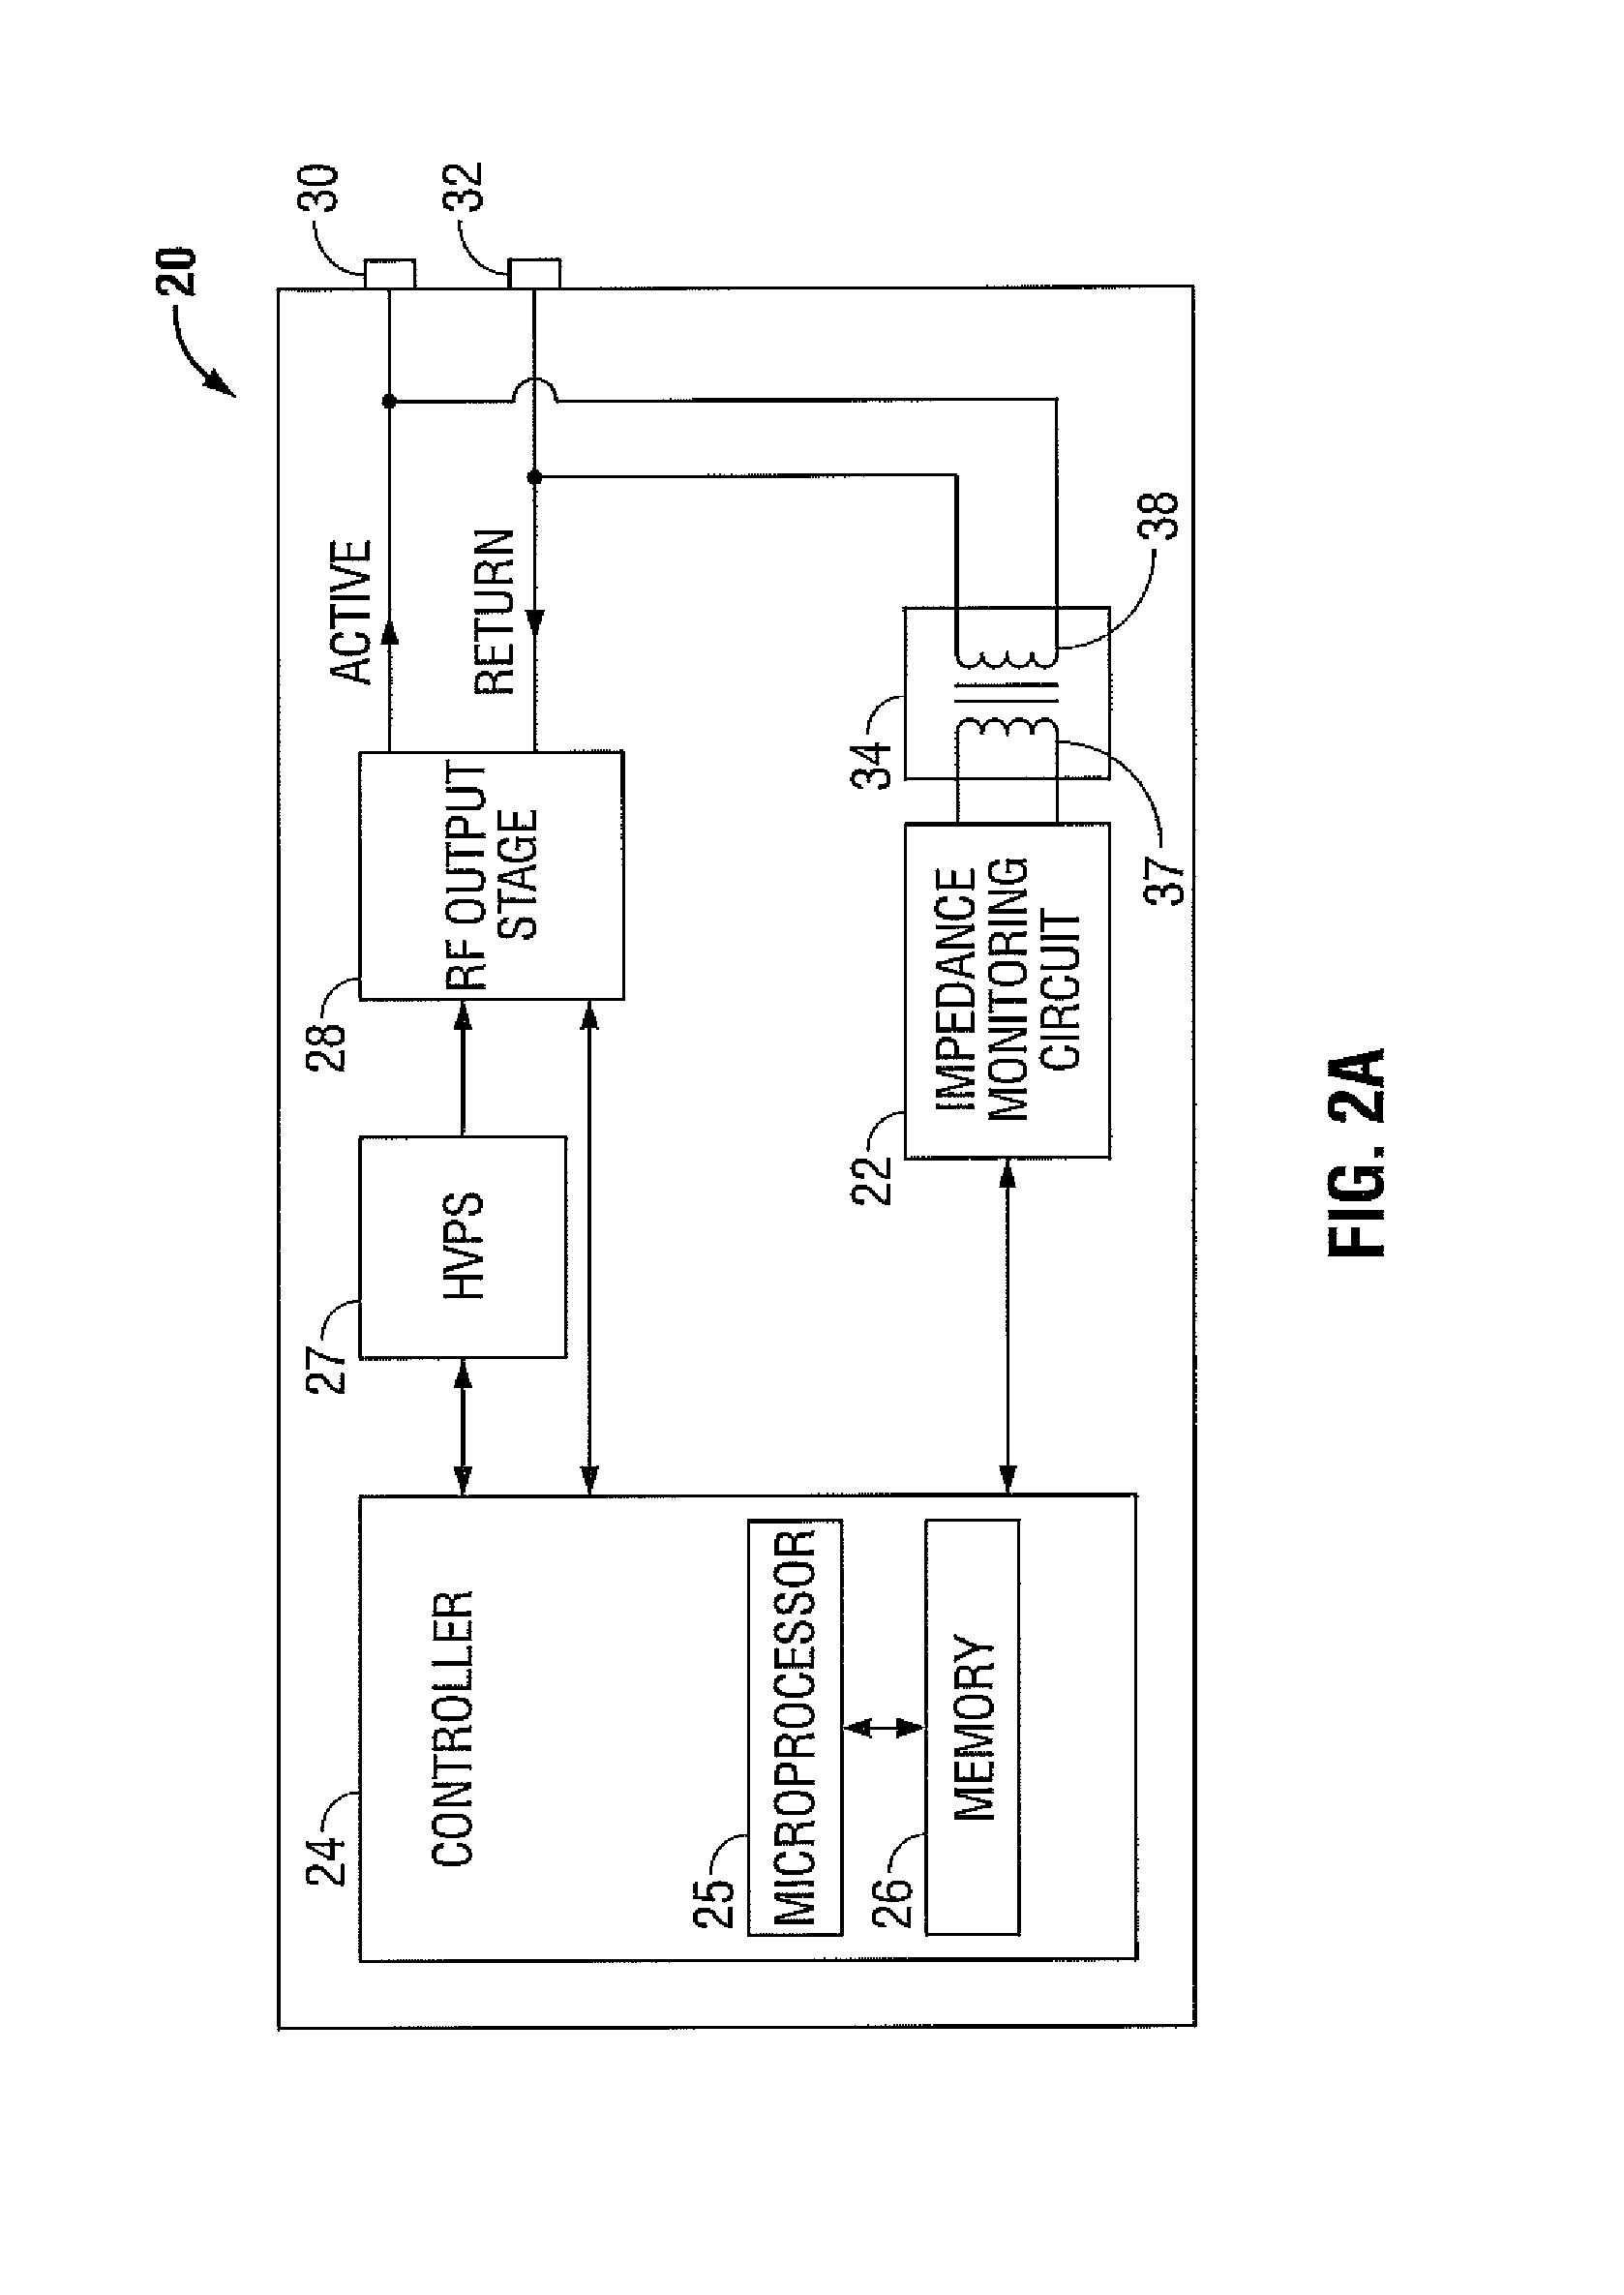 System and method for augmented impedance sensing